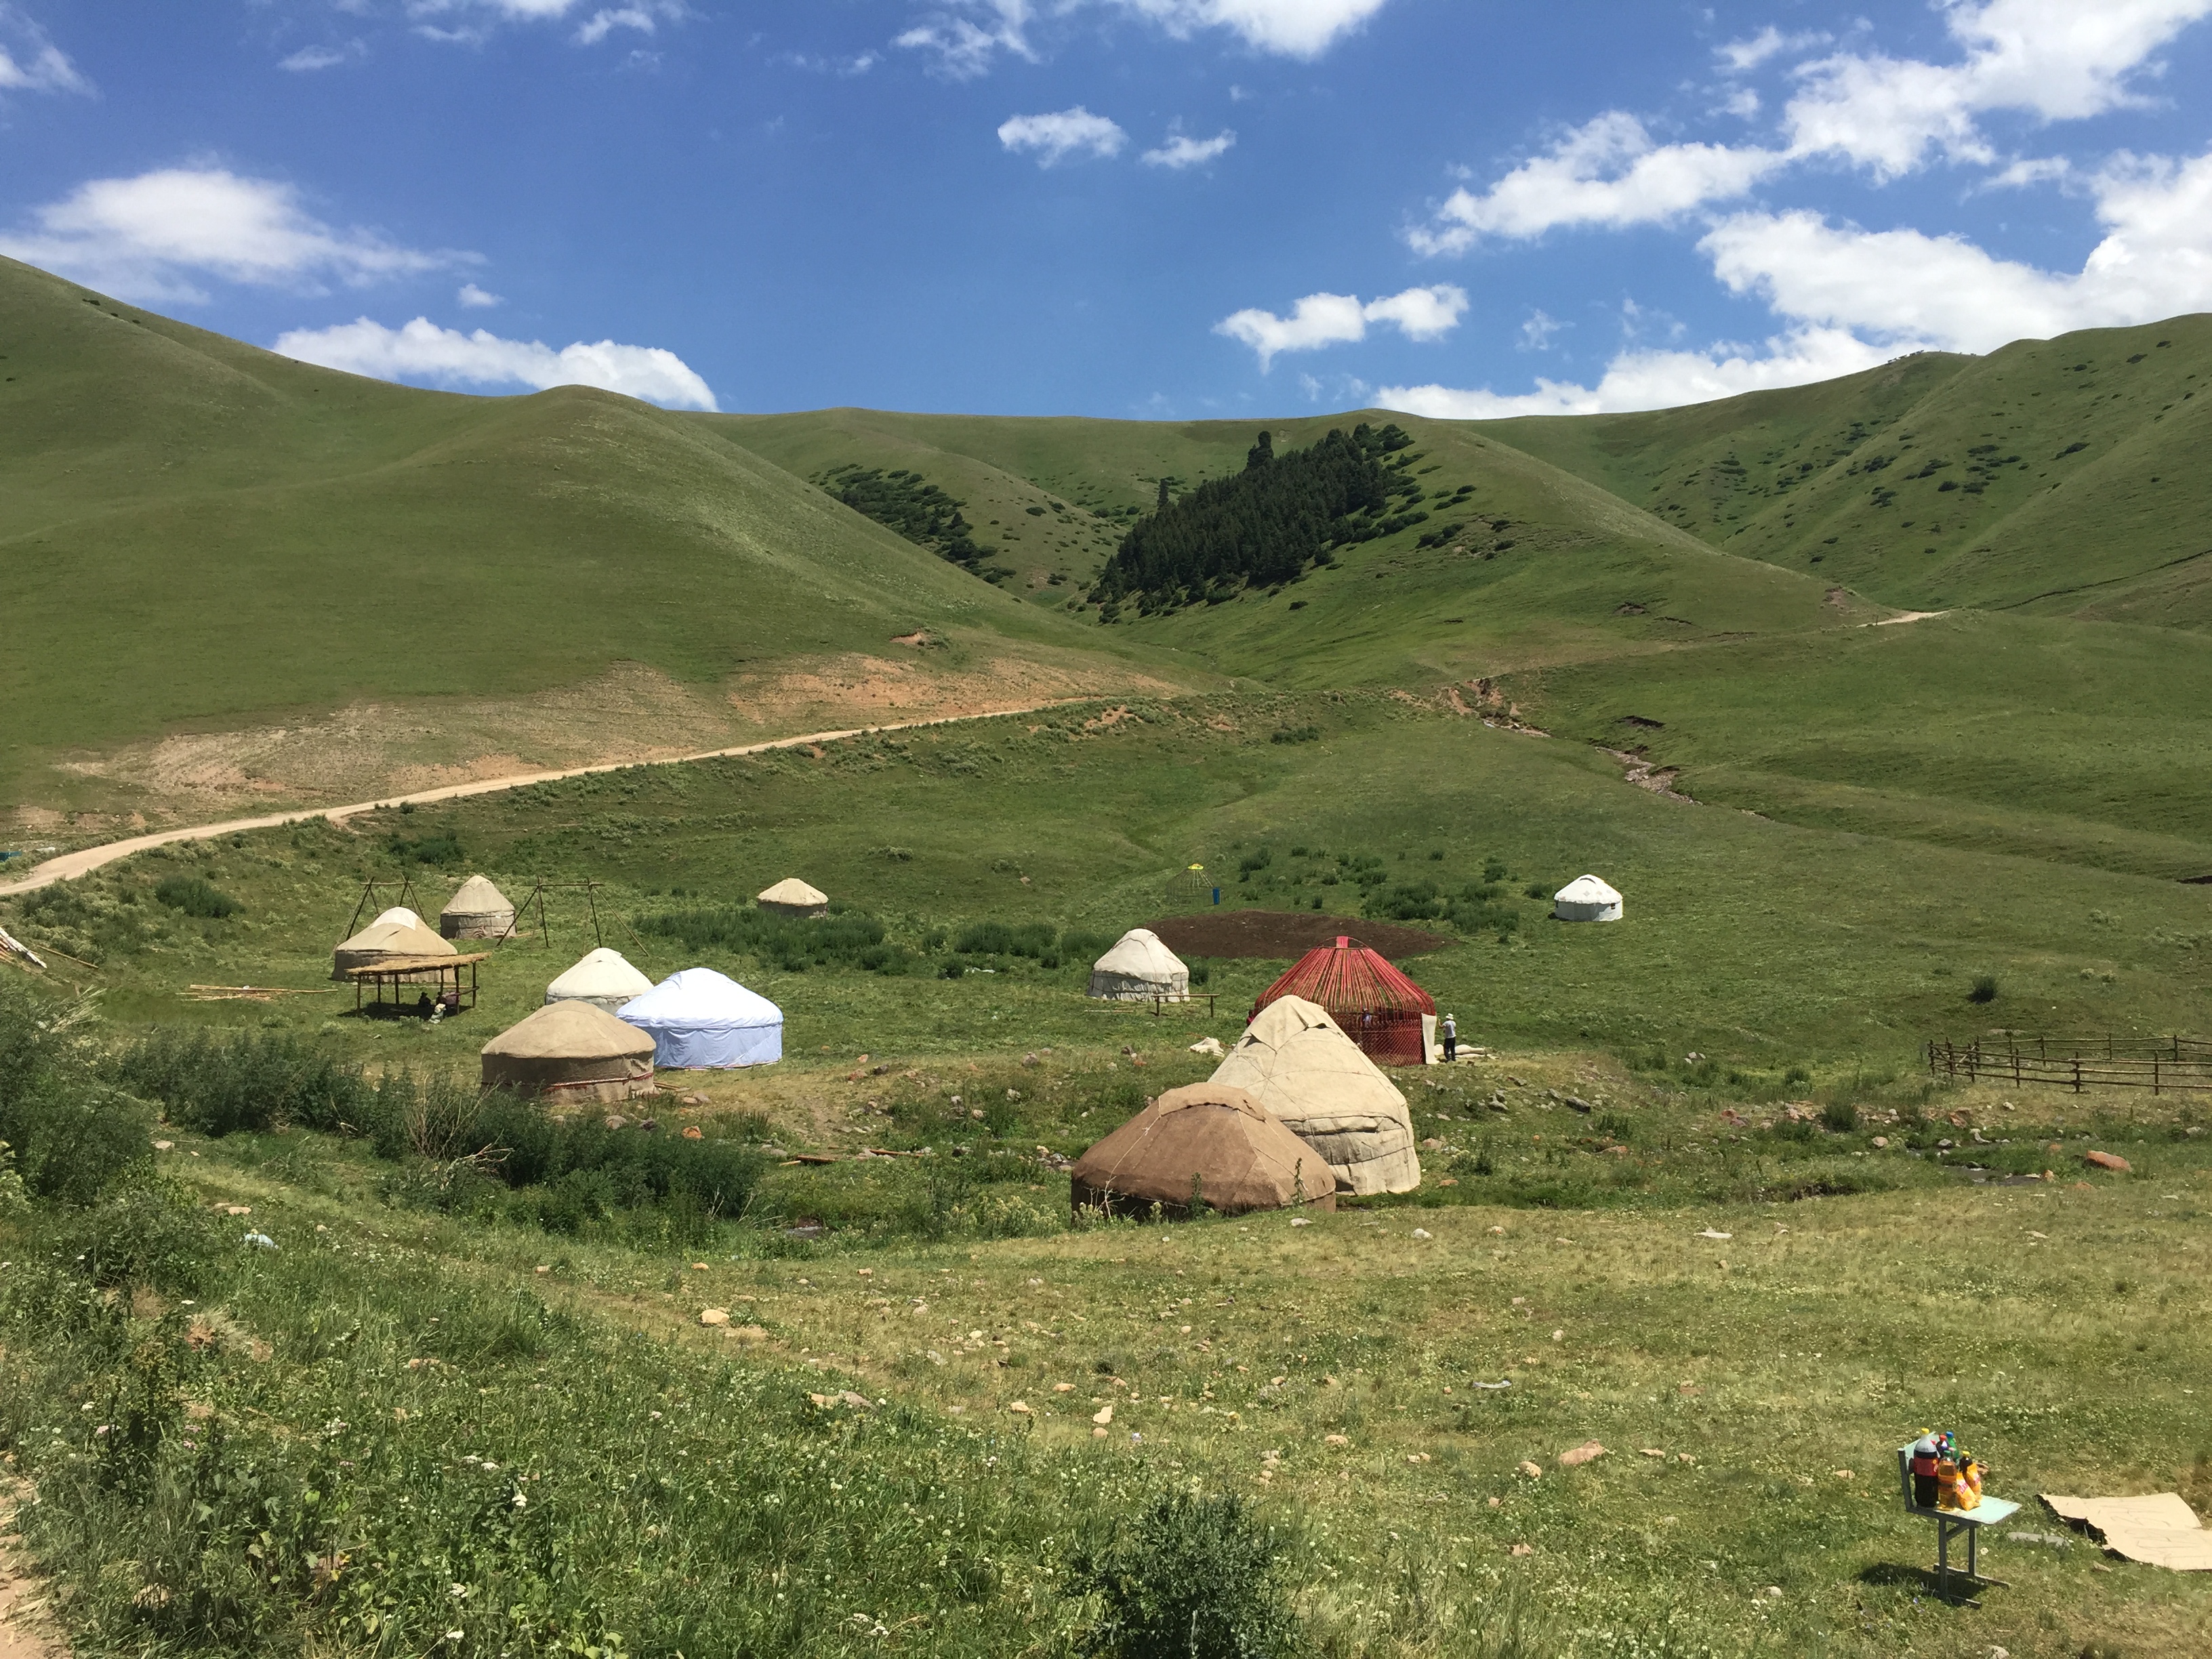 Life as an EFL teacher in Kazakhstan is peaceful like the rural nature of the country.